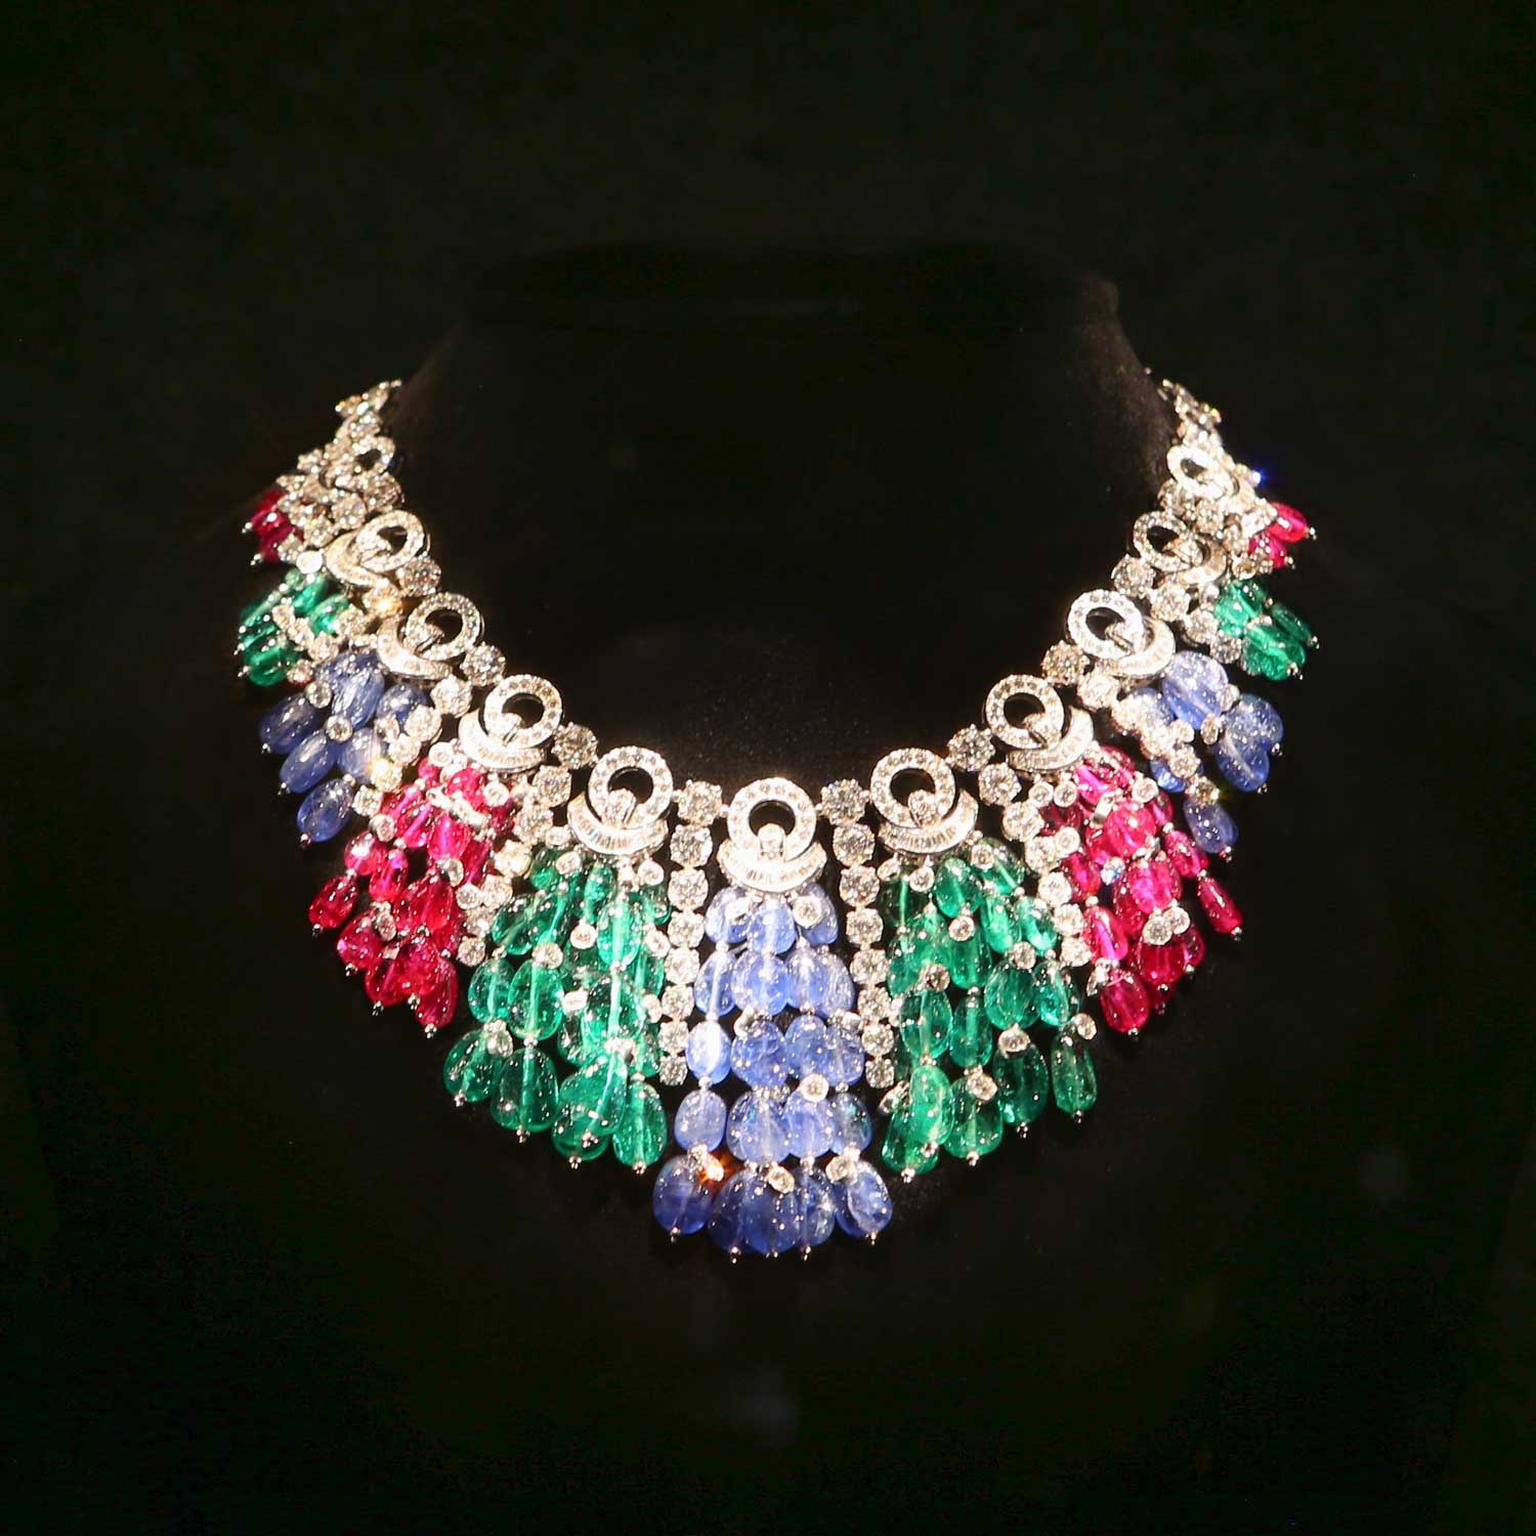 Bulgari multi-coloured gemstone necklace from a private collection in the US